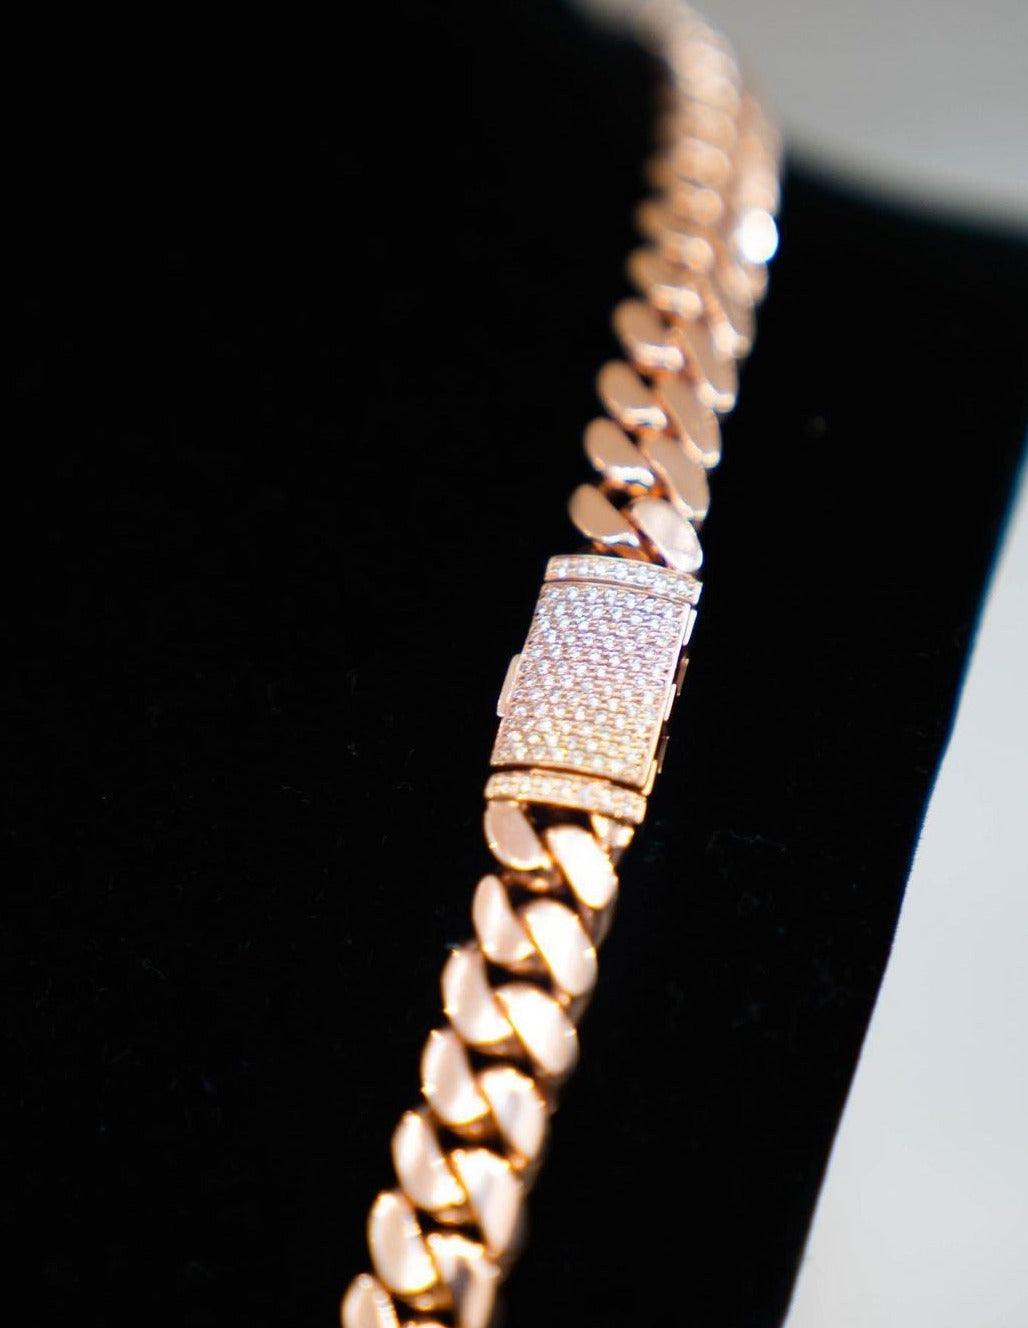 RARE PRINCE by CARAT SUTRA | Solid 16mm Miami Cuban Link Chain with Iced Lock | 22kt Gold Micron Plated on 925 Sterling Silver Chain with AAA+ Quality Swarovski Diamonds | Men's Jewelry | With Certificate of Authenticity and 925 Hallmark - caratsutra